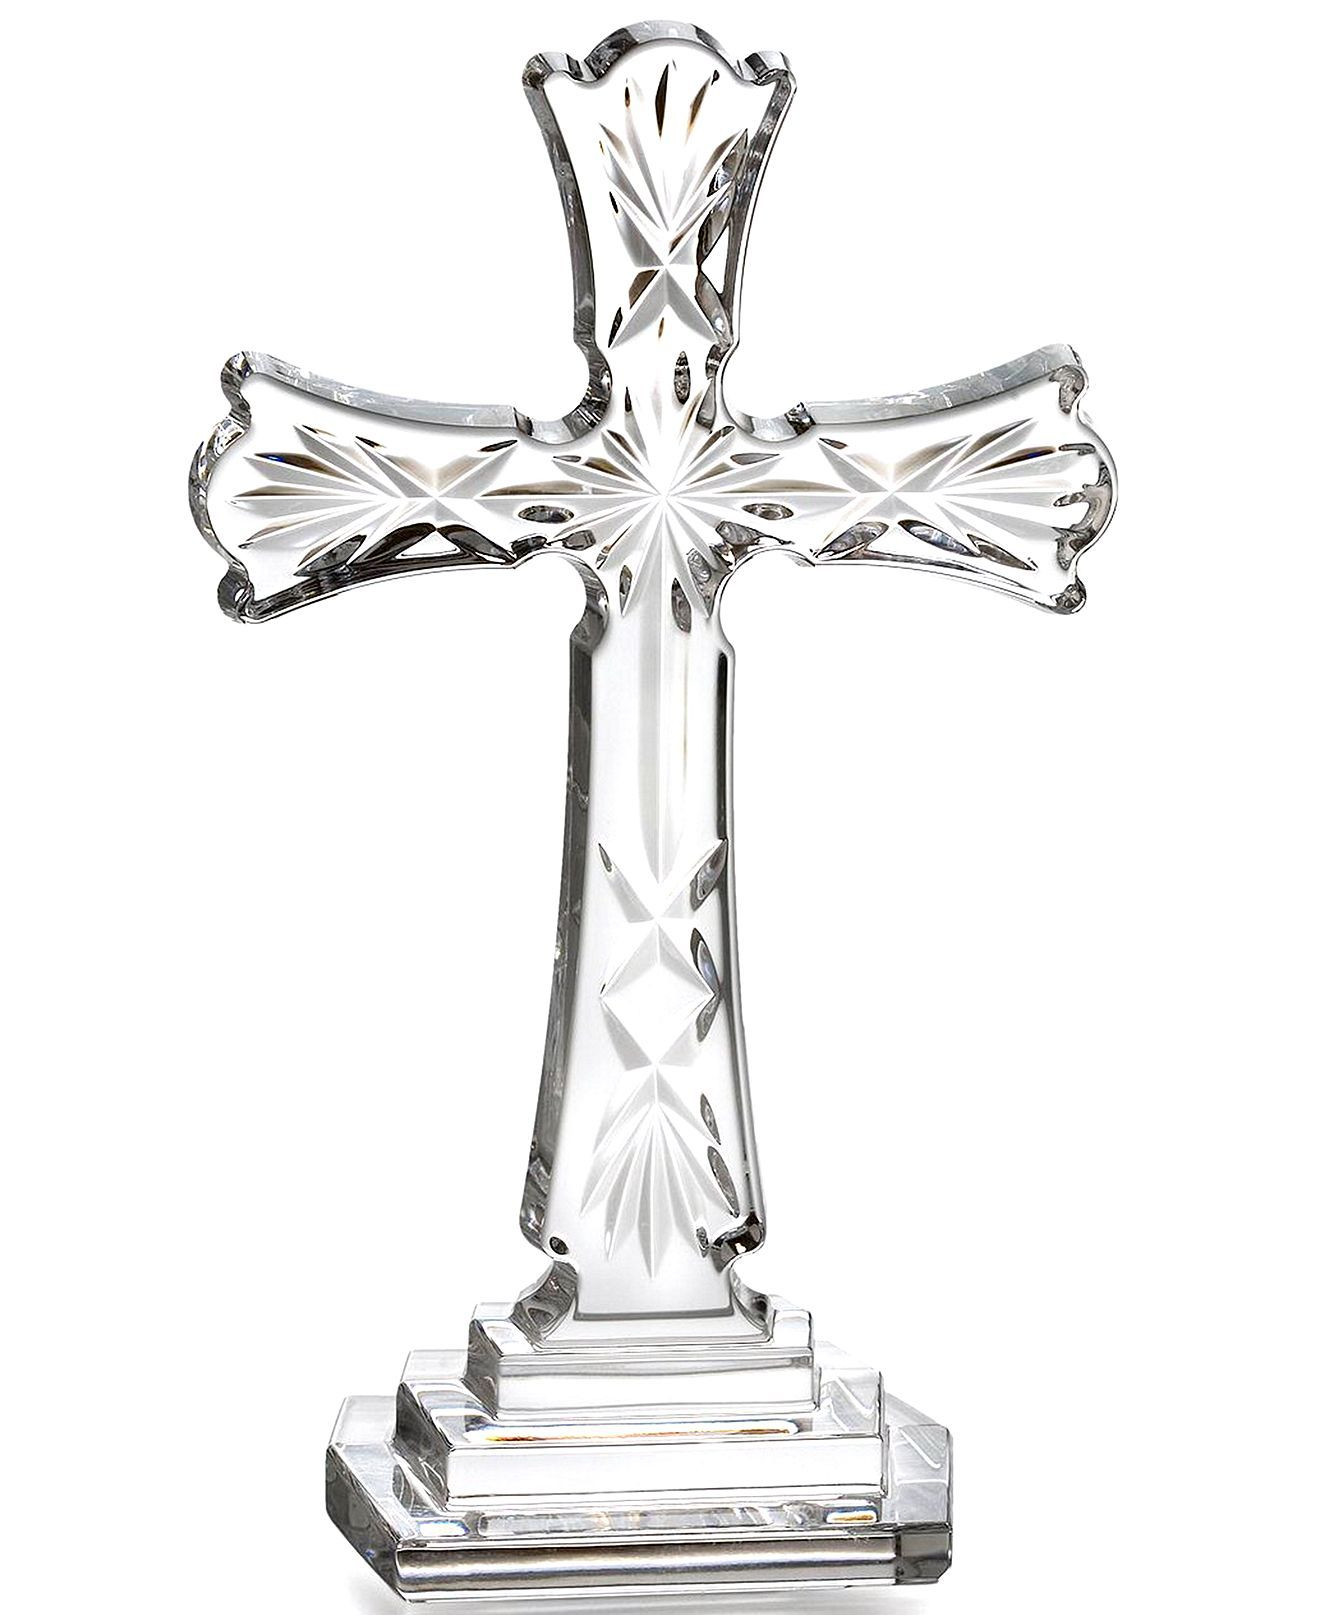 12 attractive Macys Crystal Vase 2024 free download macys crystal vase of gifts standing cross figurine 8 75 collectiblesac29dc2a4figurines with regard to waterford gifts standing cross figurine